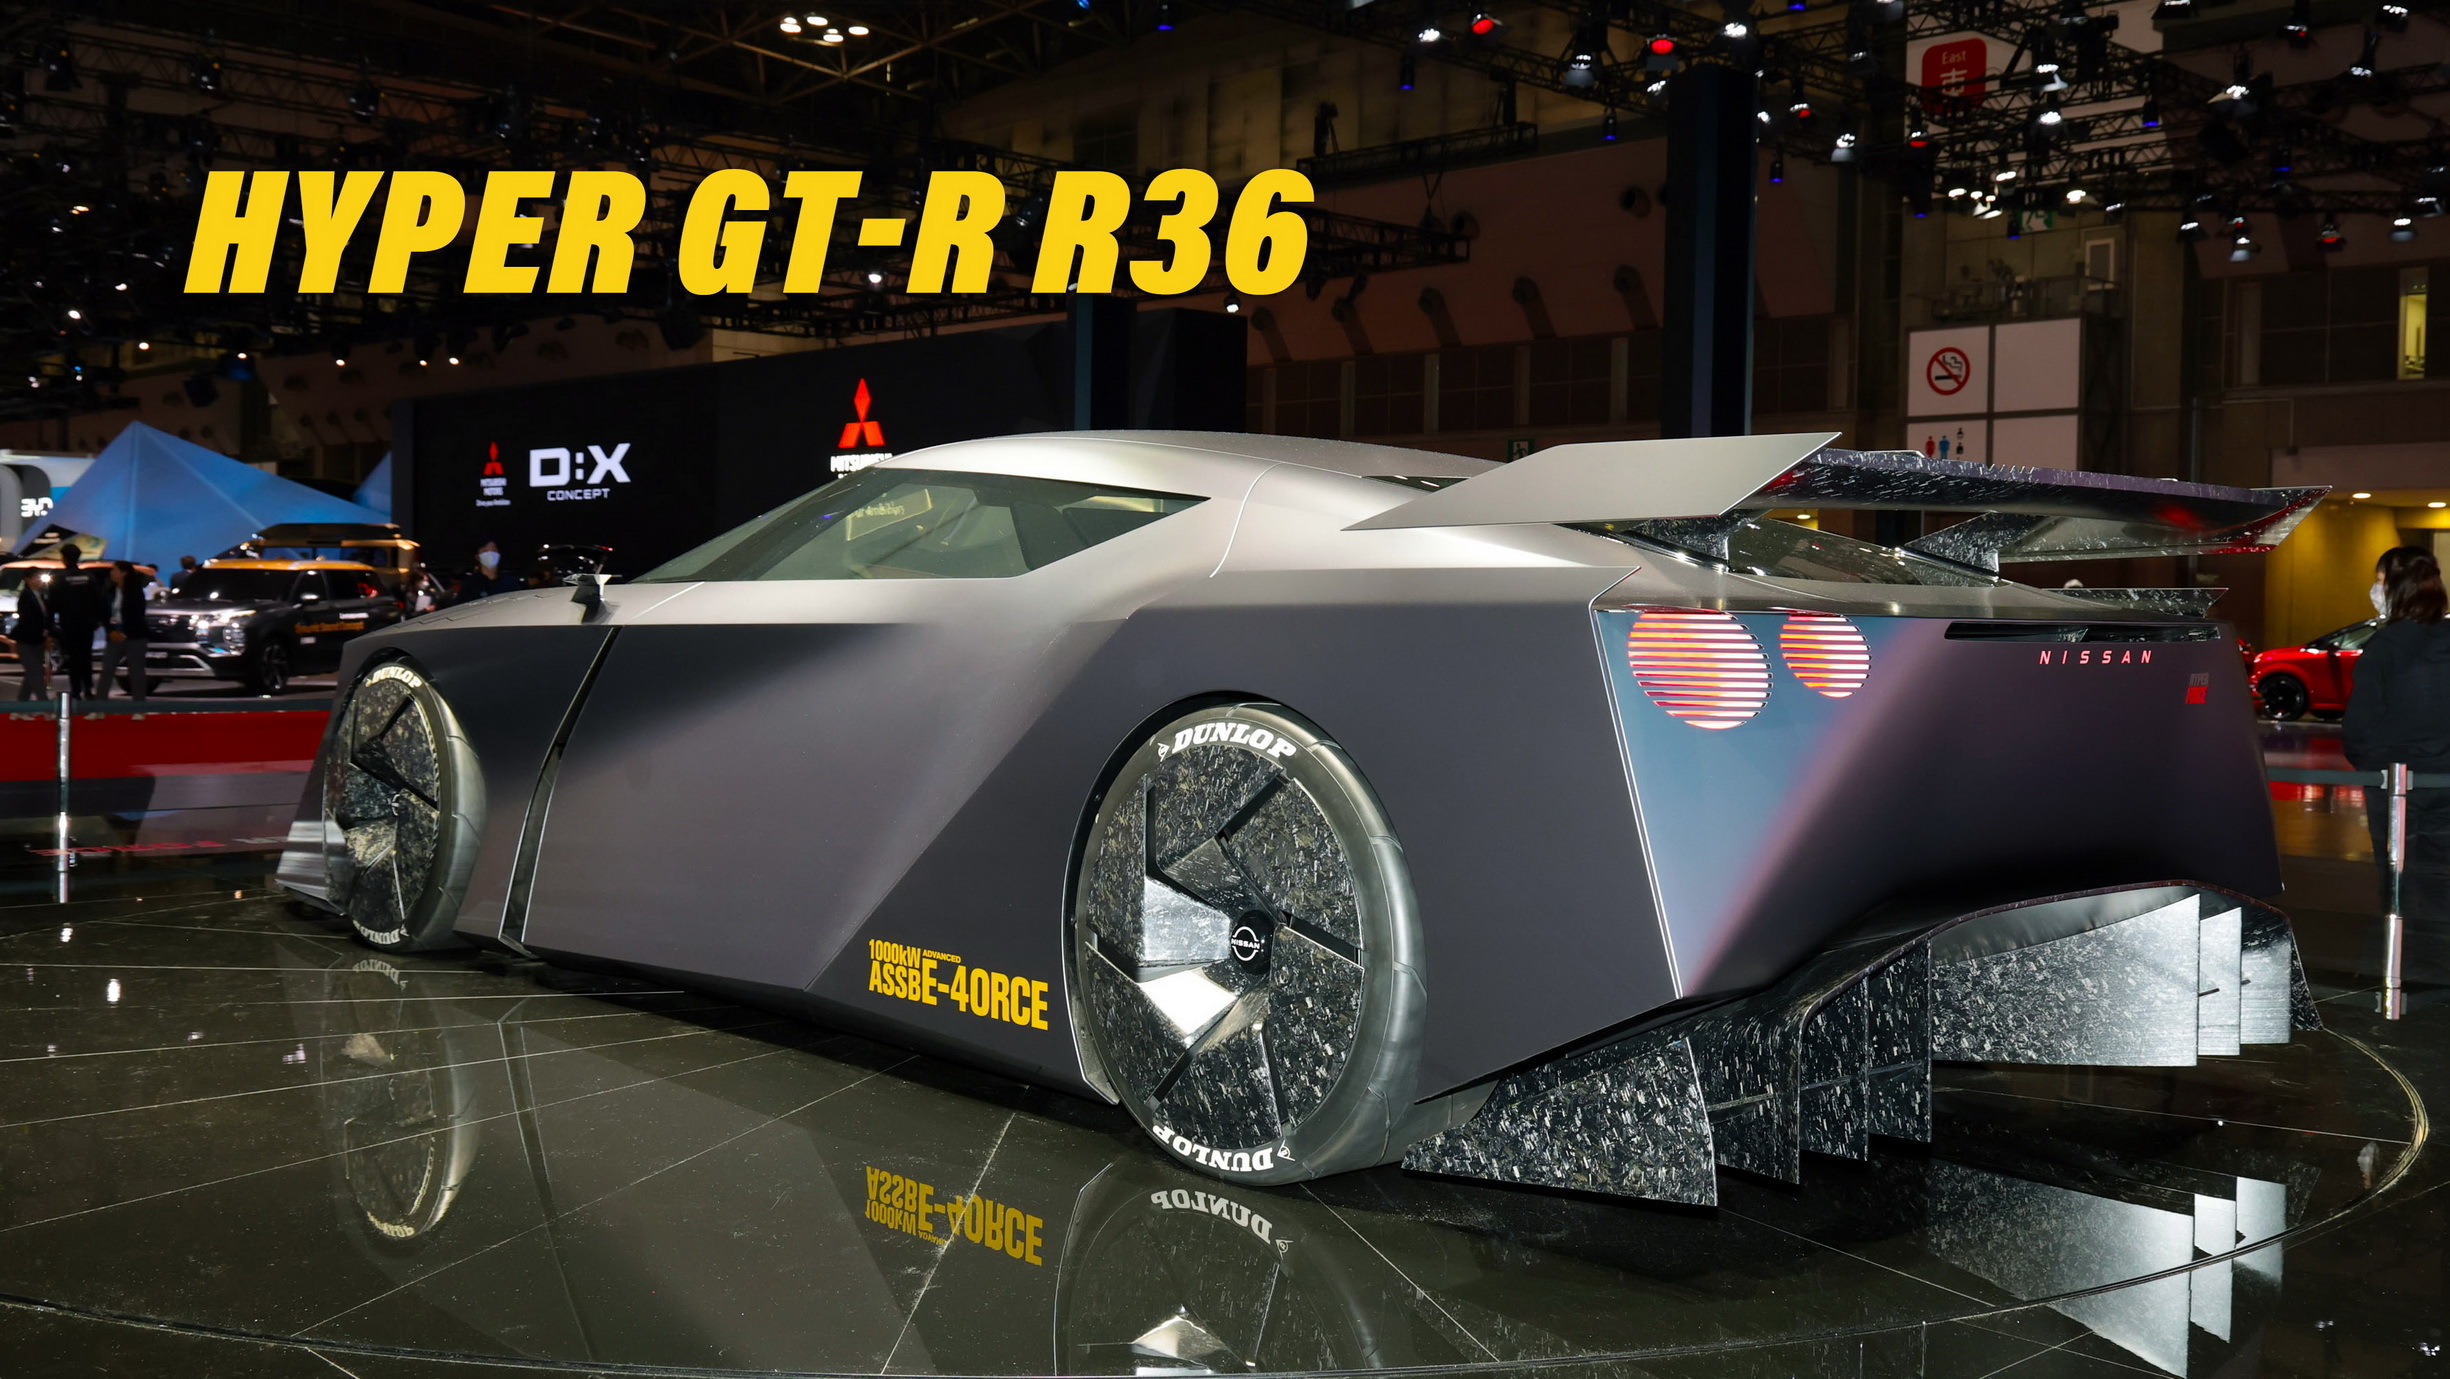 Next-gen Nissan GT-R is already in the works as a 2023 model 